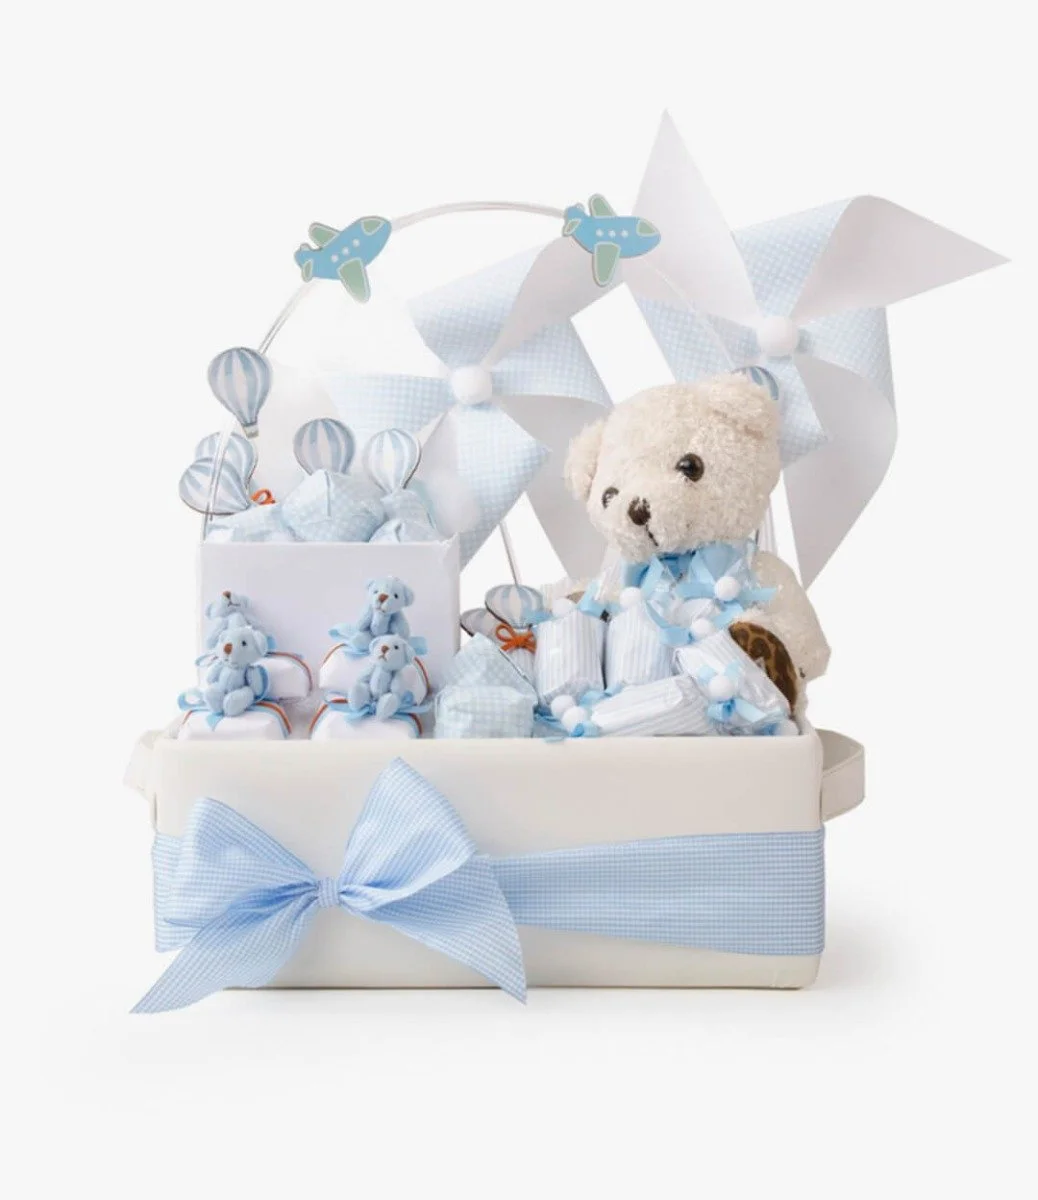 Up, Up & Away Baby Gift Basket - Small